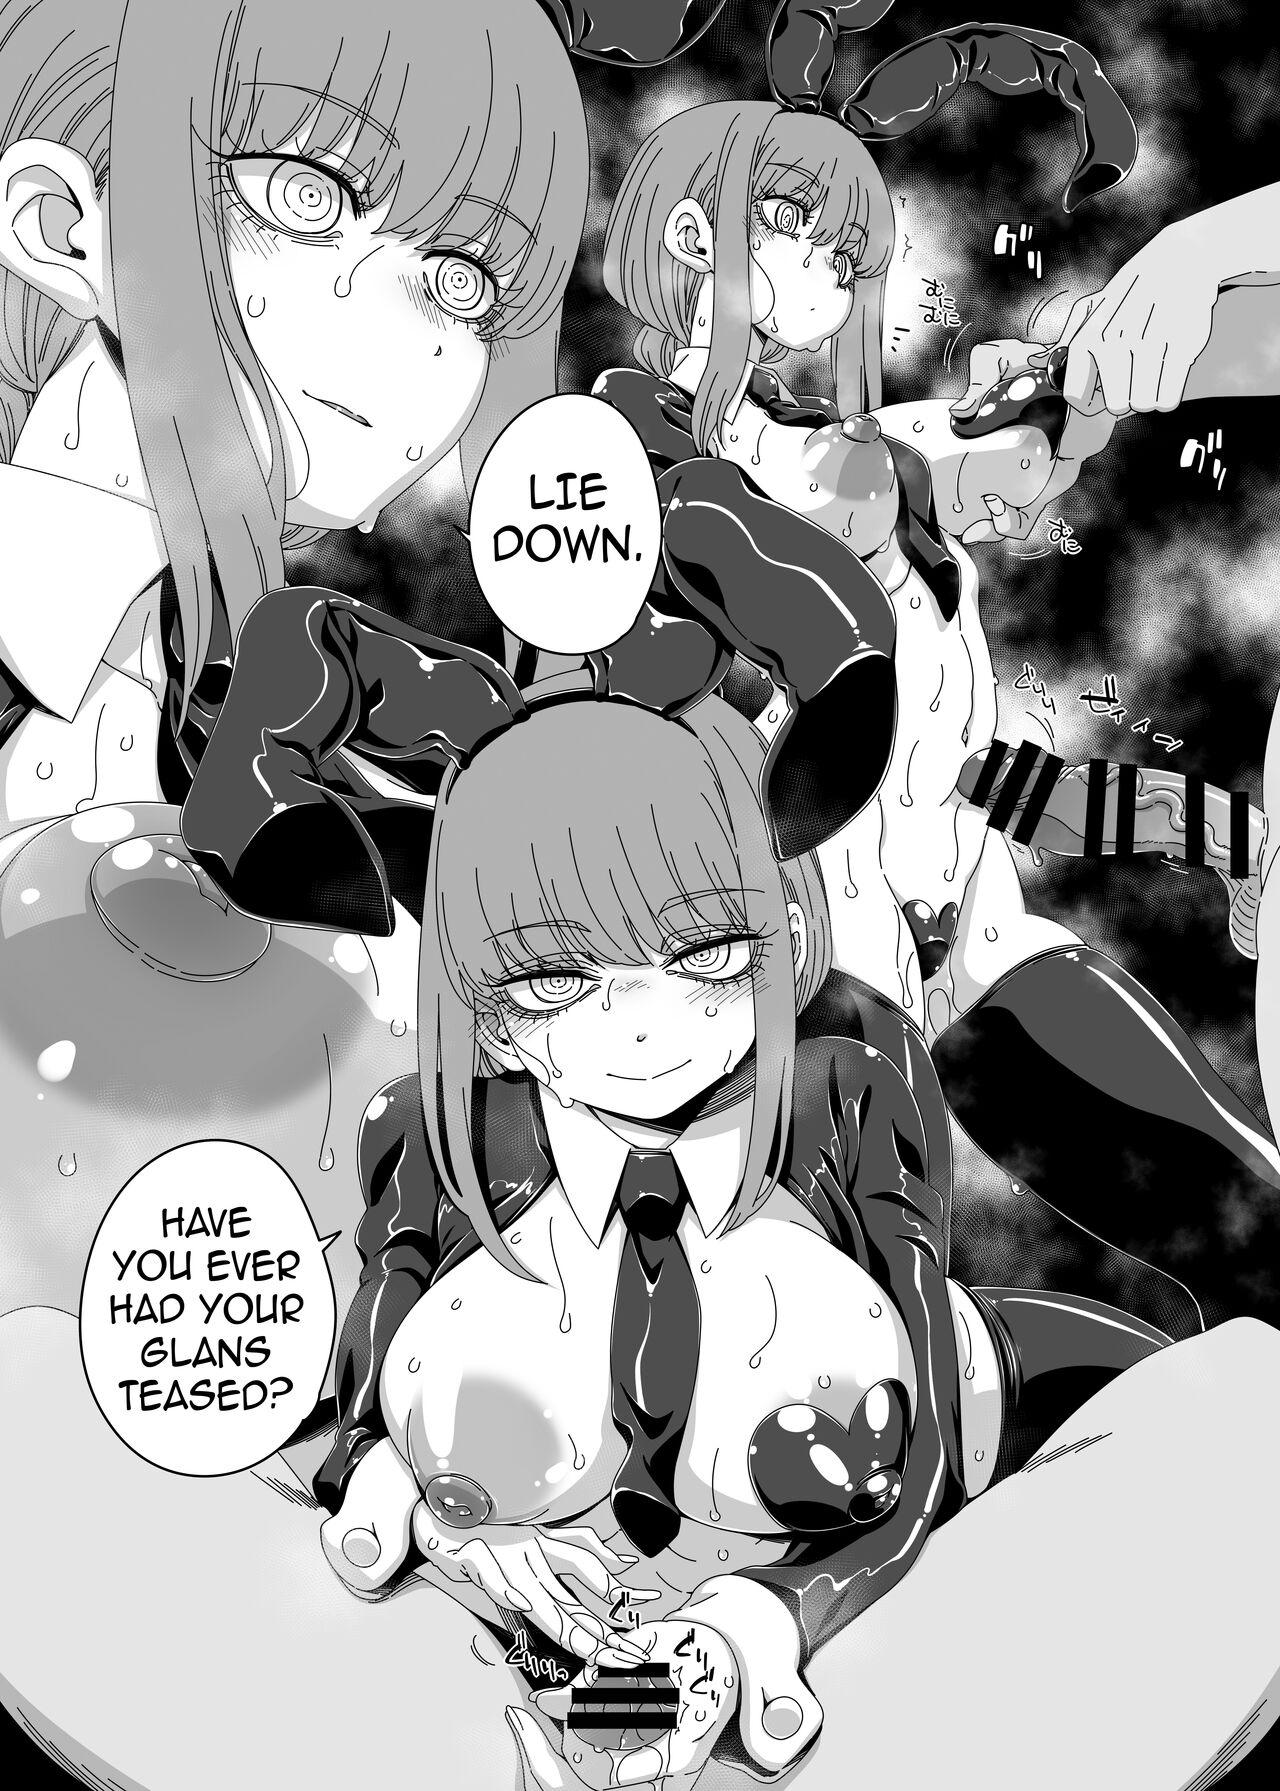 Concha Gyaku Bunny Kite Shihai shite Hoshii | I Want Her to Dress Up in an Inverted Bunny Girl Outfit and Dominate Me - Chainsaw man College - Page 10